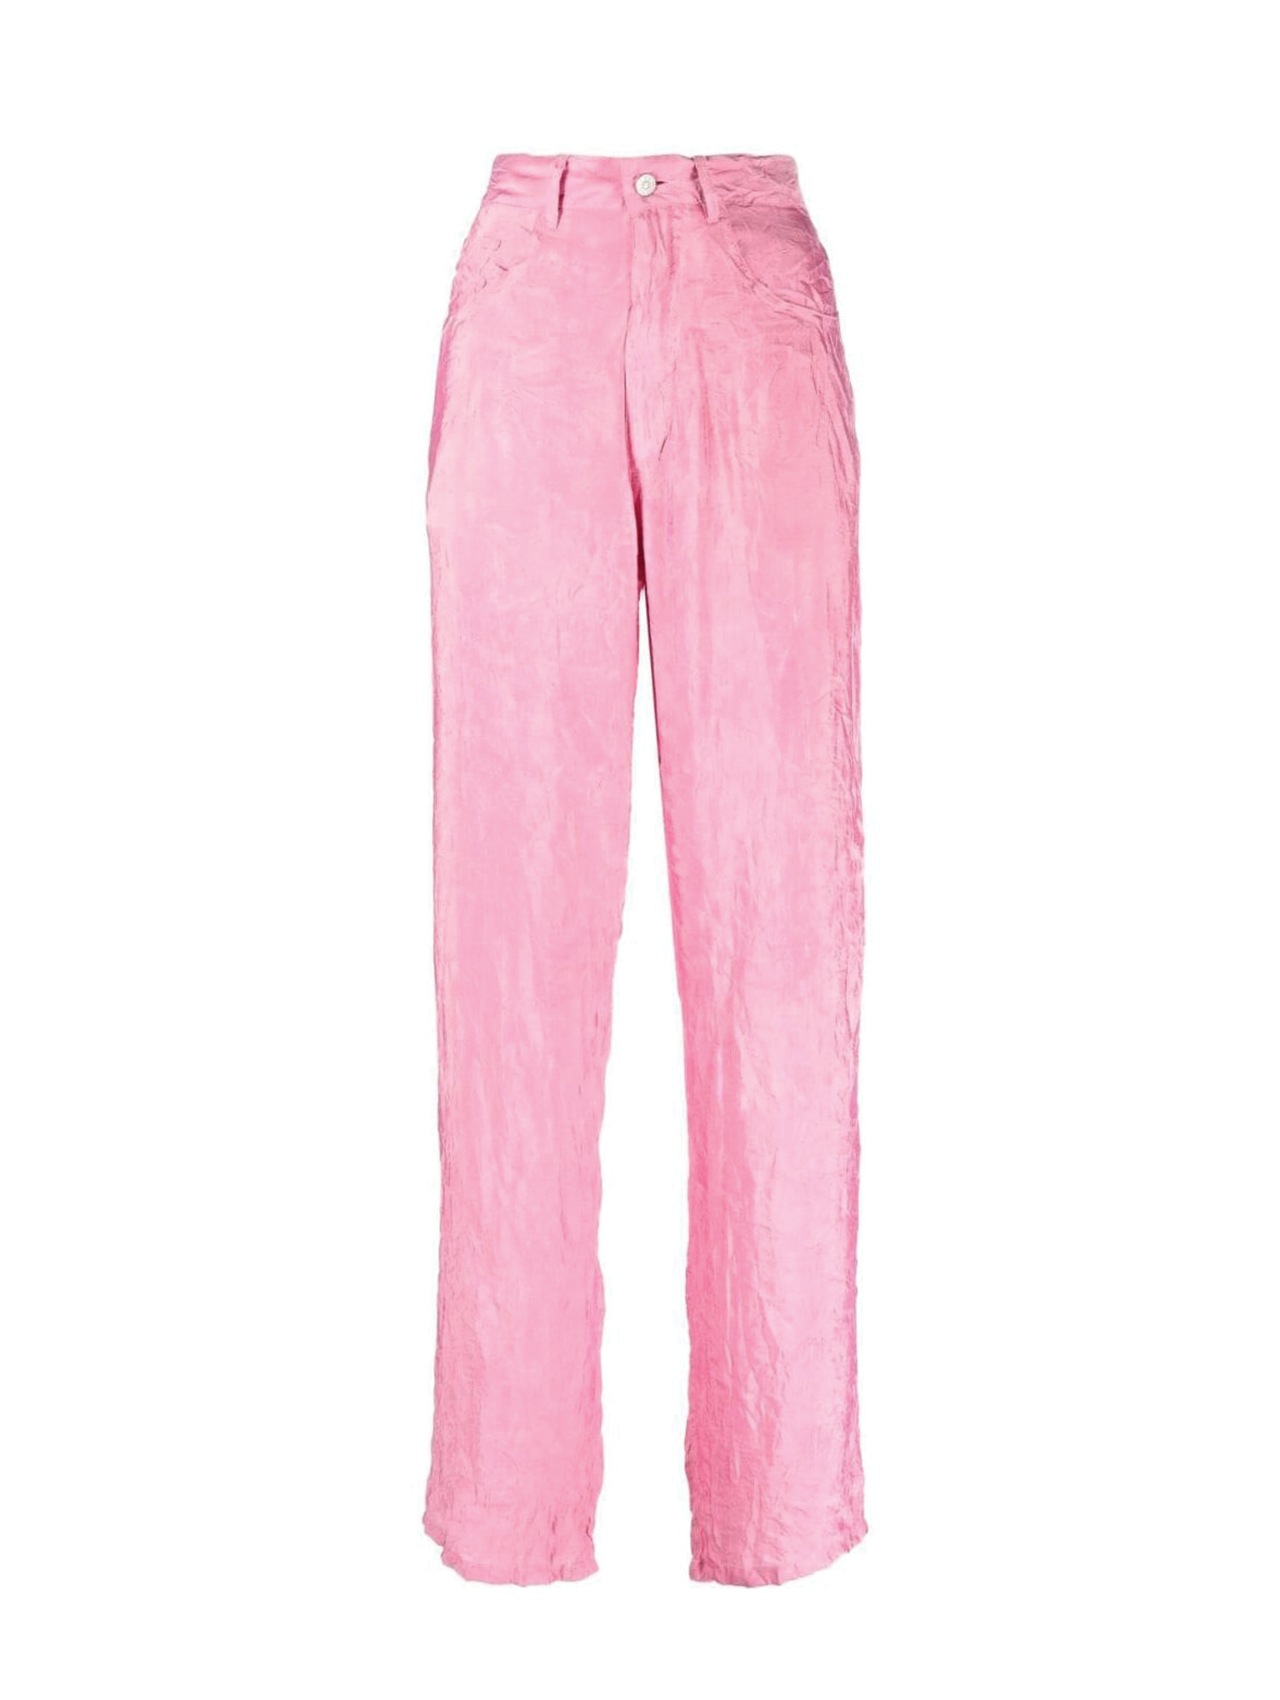 MM6 Pink Crinkle Relaxed Fit Pants